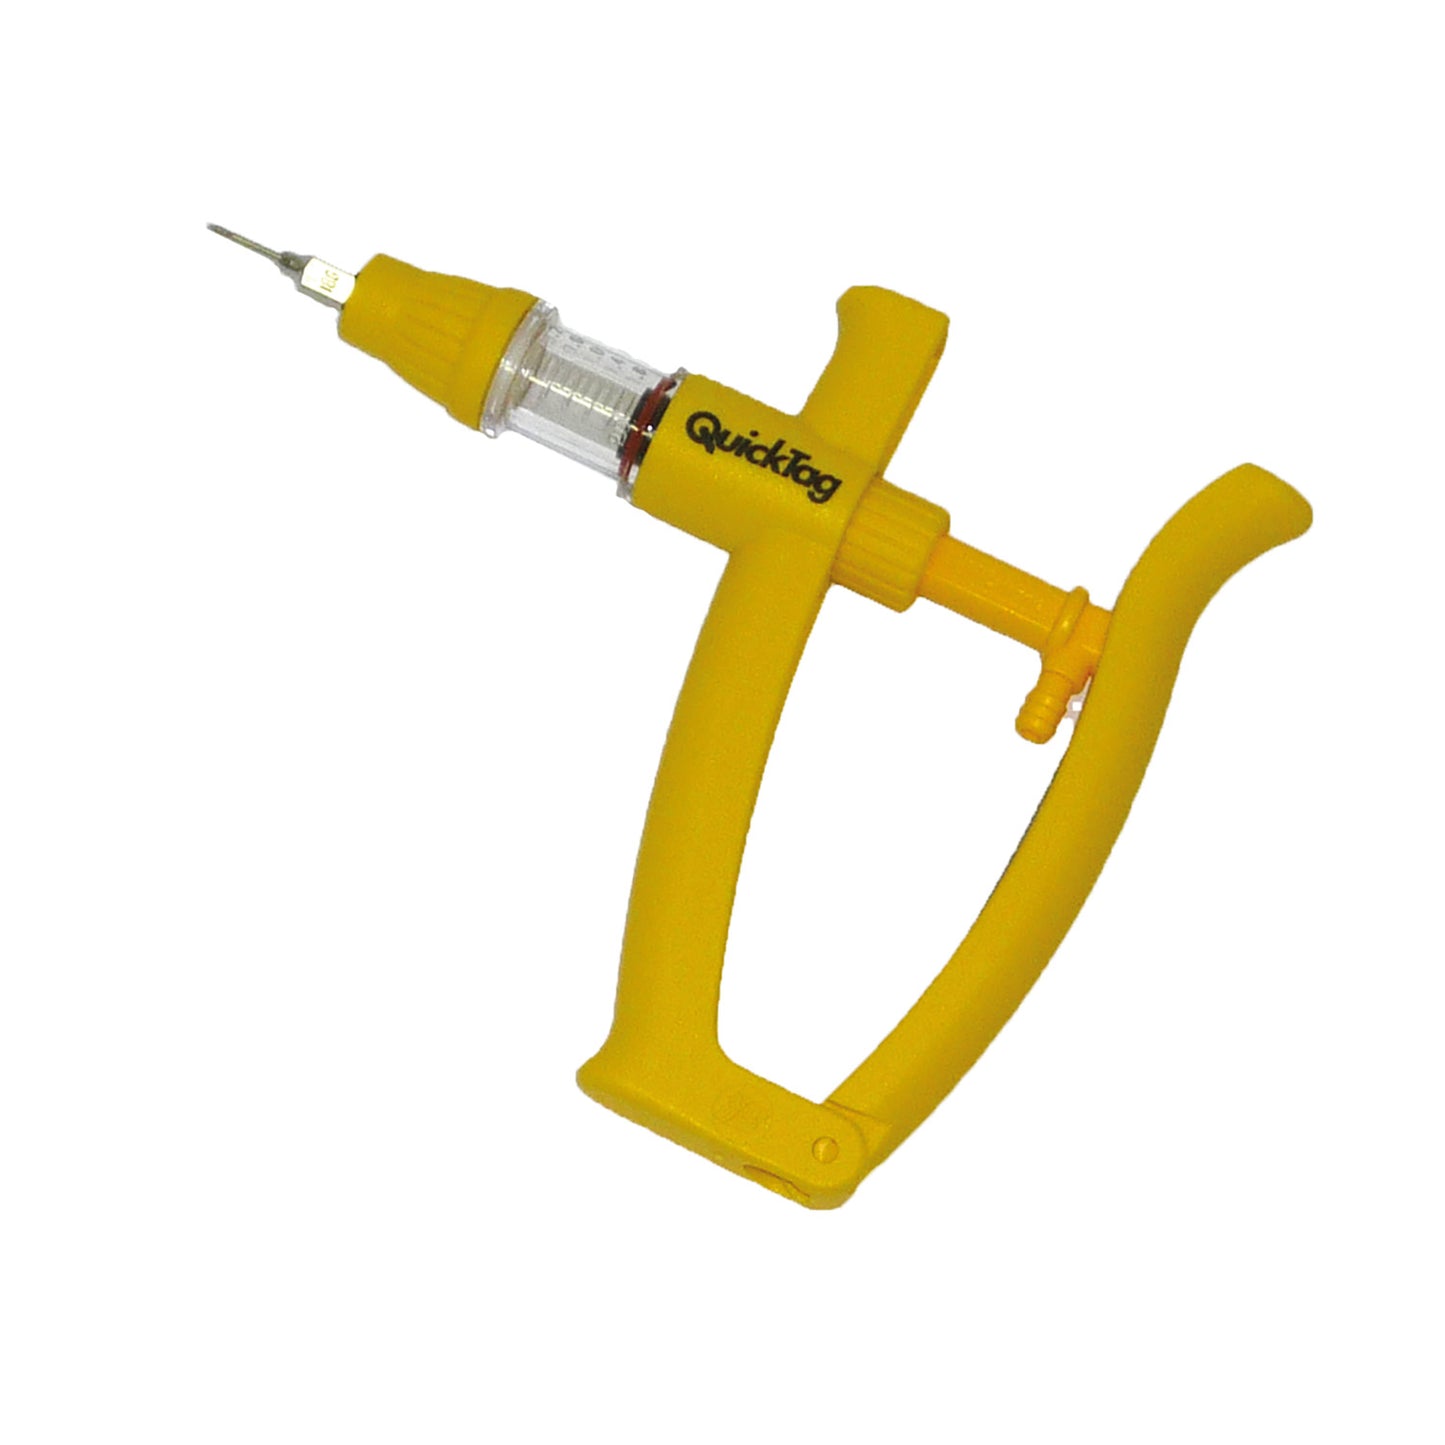 Quicktag AutoJect Injector 2ml